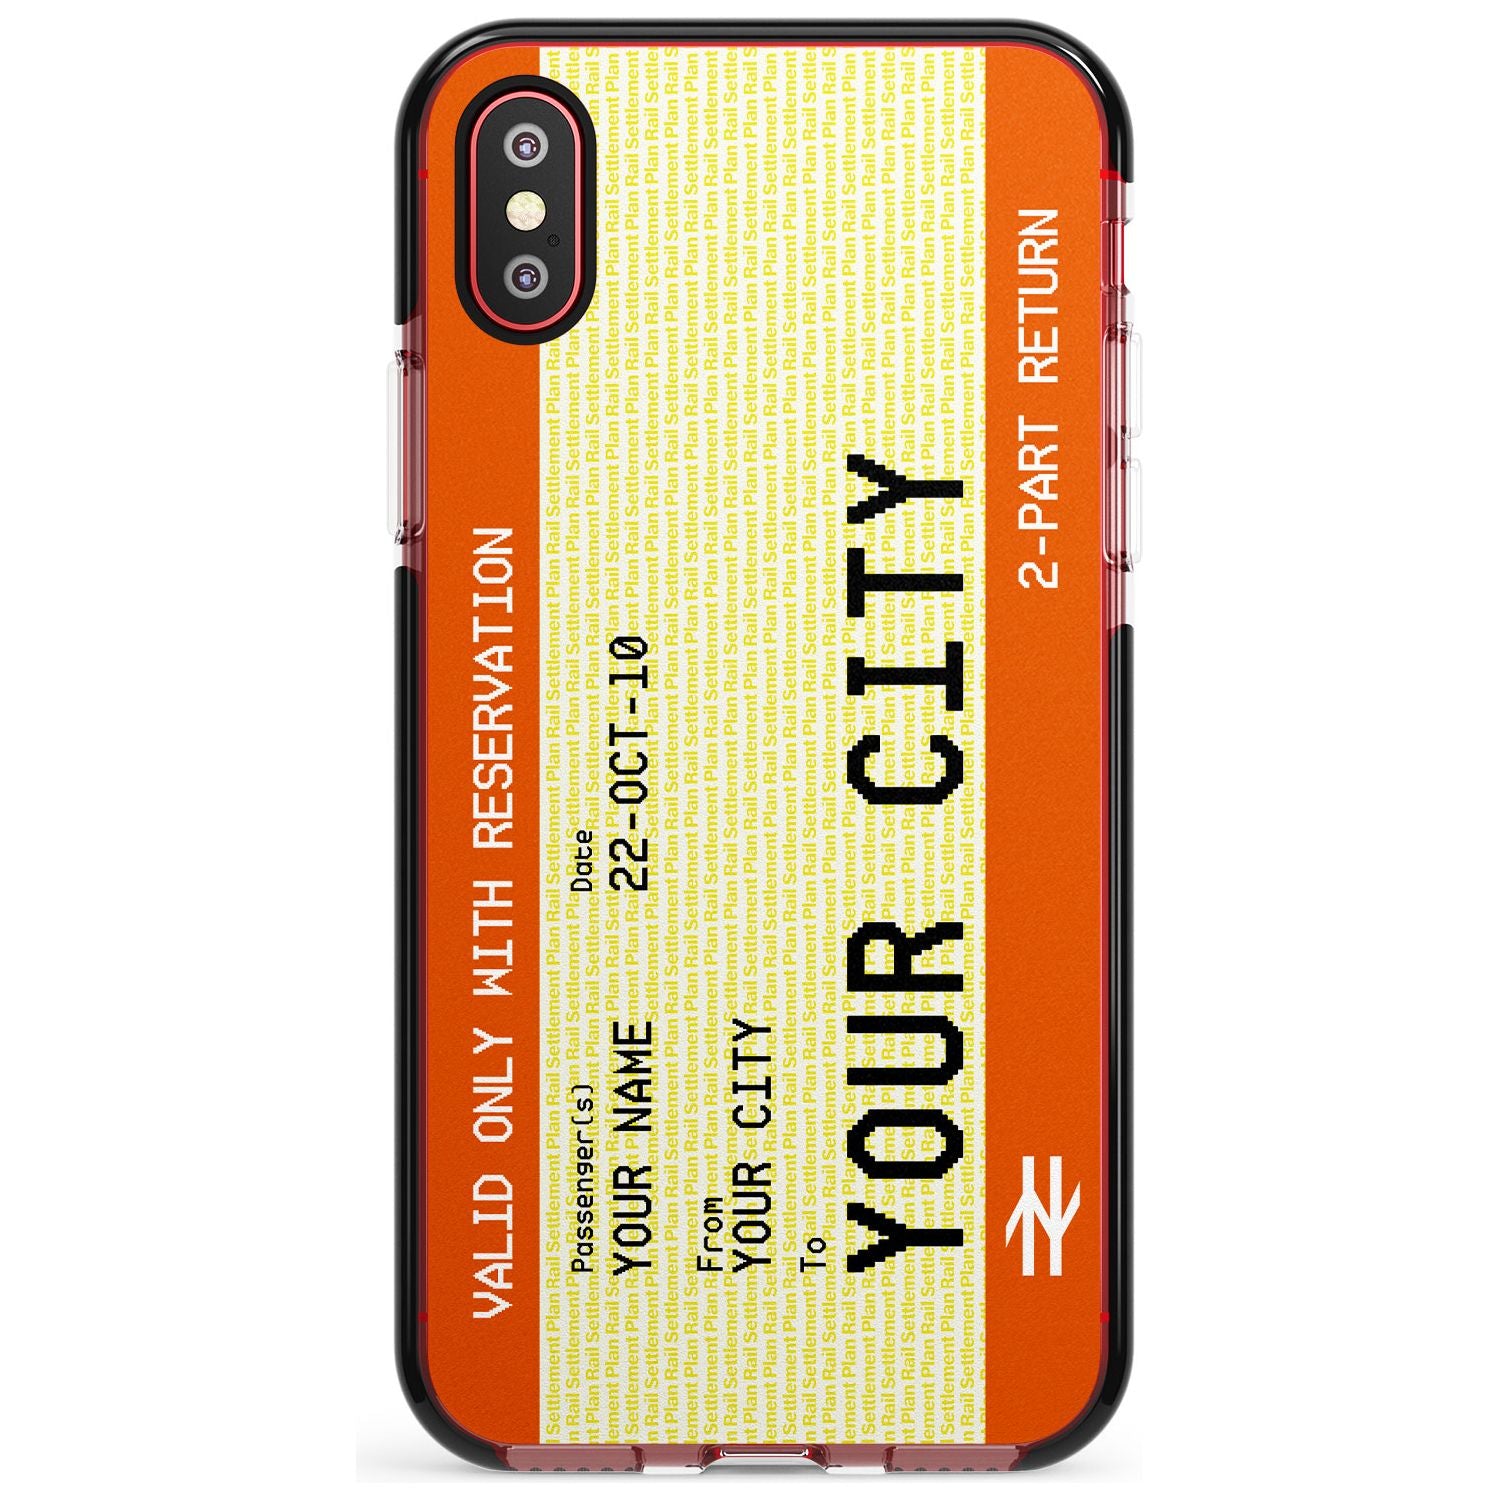 Personalised Create Your Own Train Ticket Black Impact Phone Case for iPhone X XS Max XR